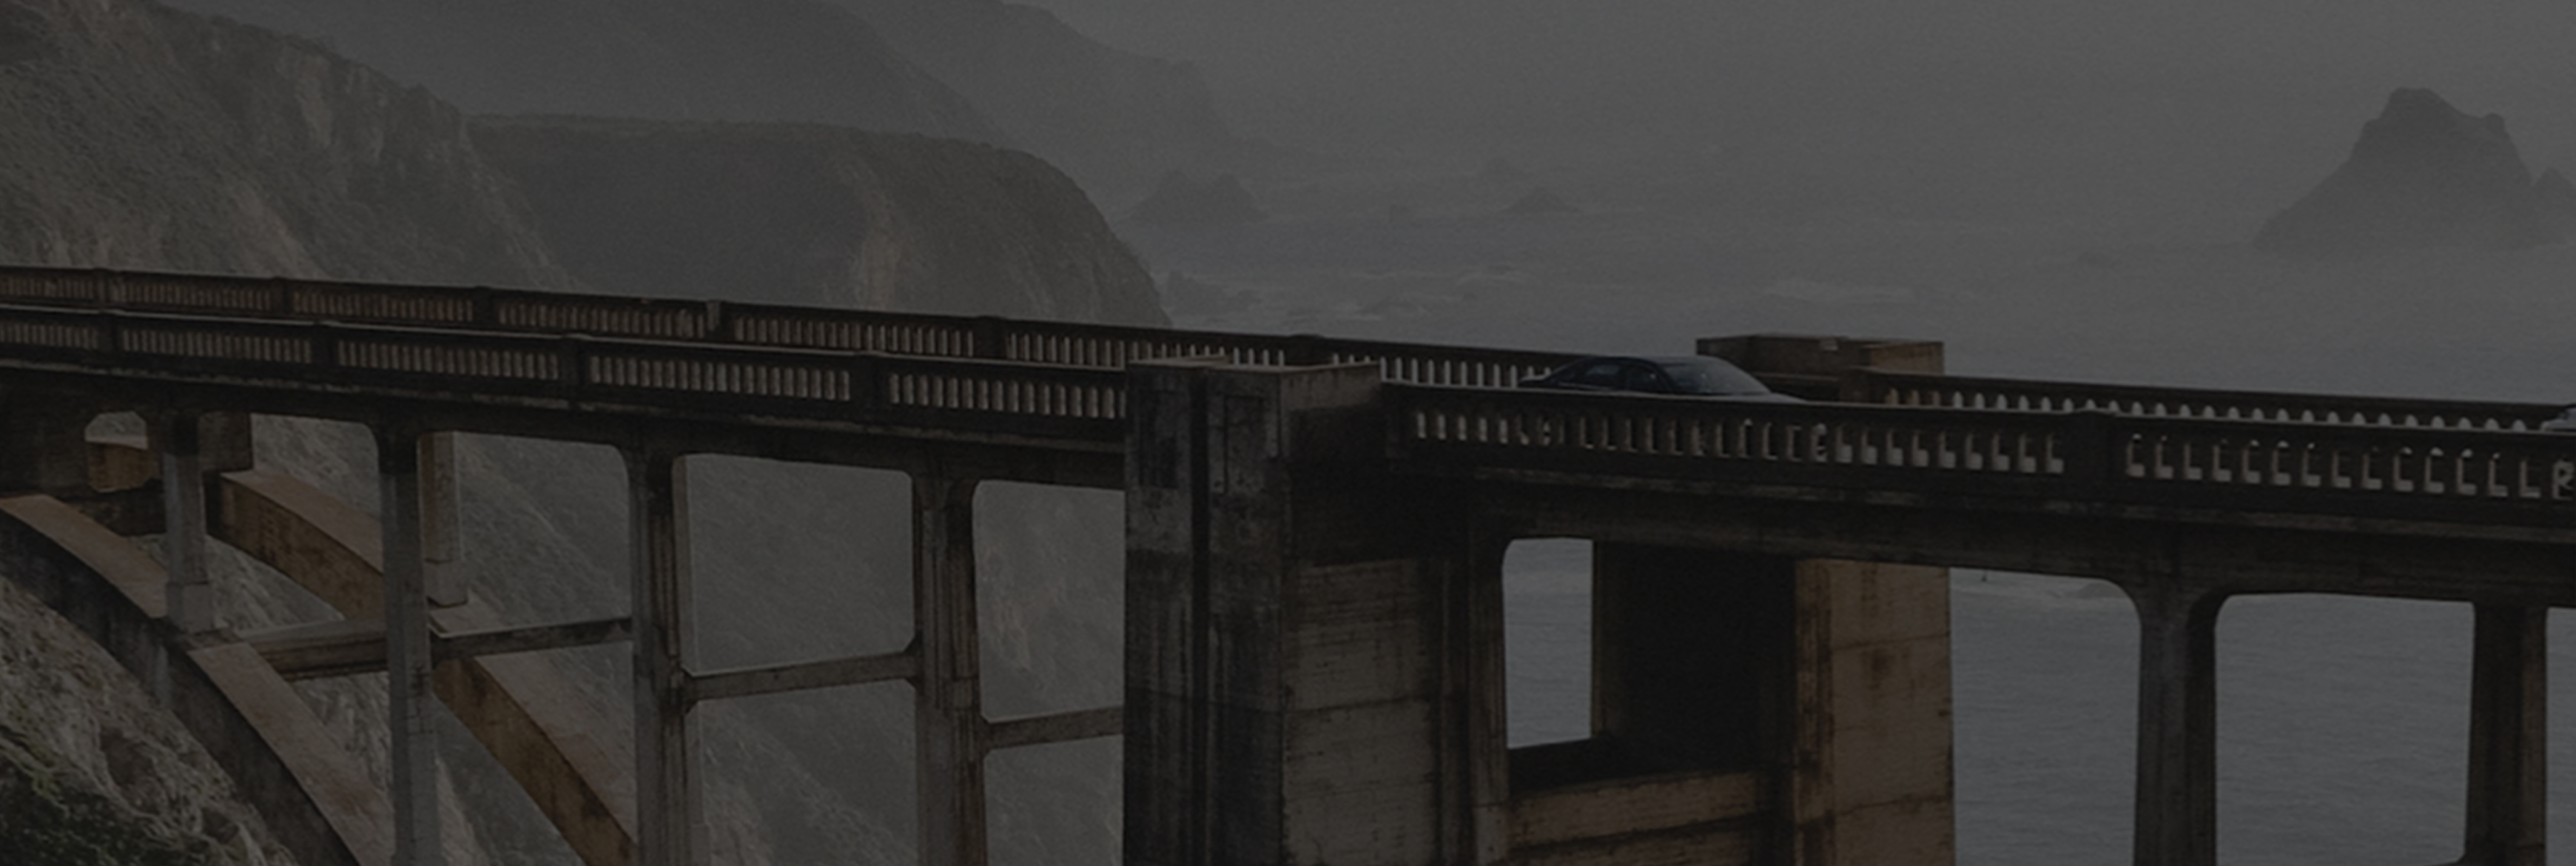 car going over a bridge in foggy weather